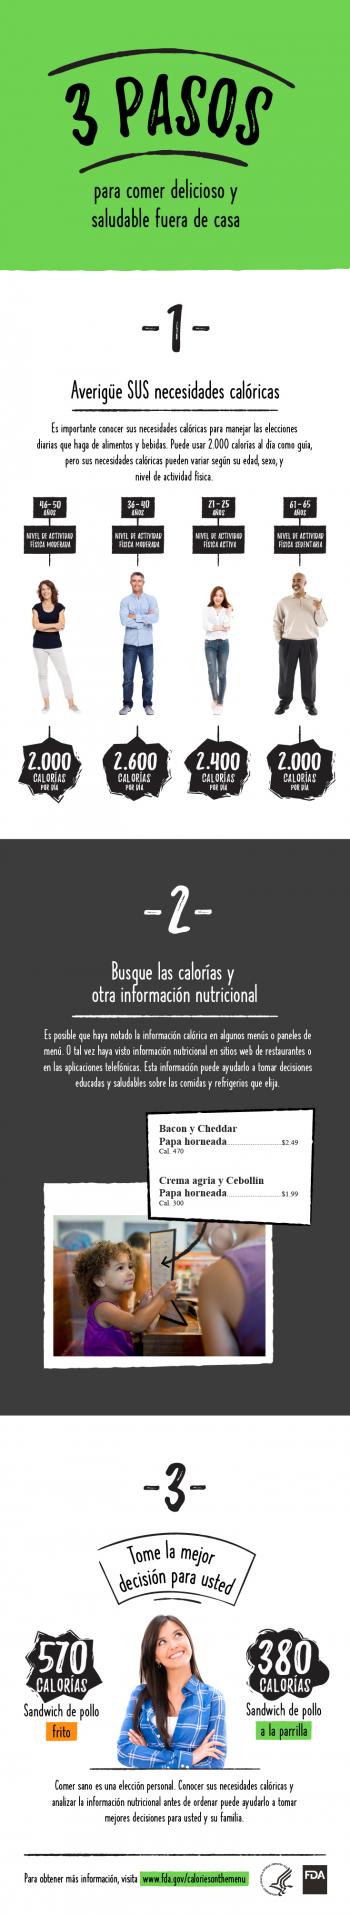 Calories on the Menu (3 Steps to Making Choices) - Spanish